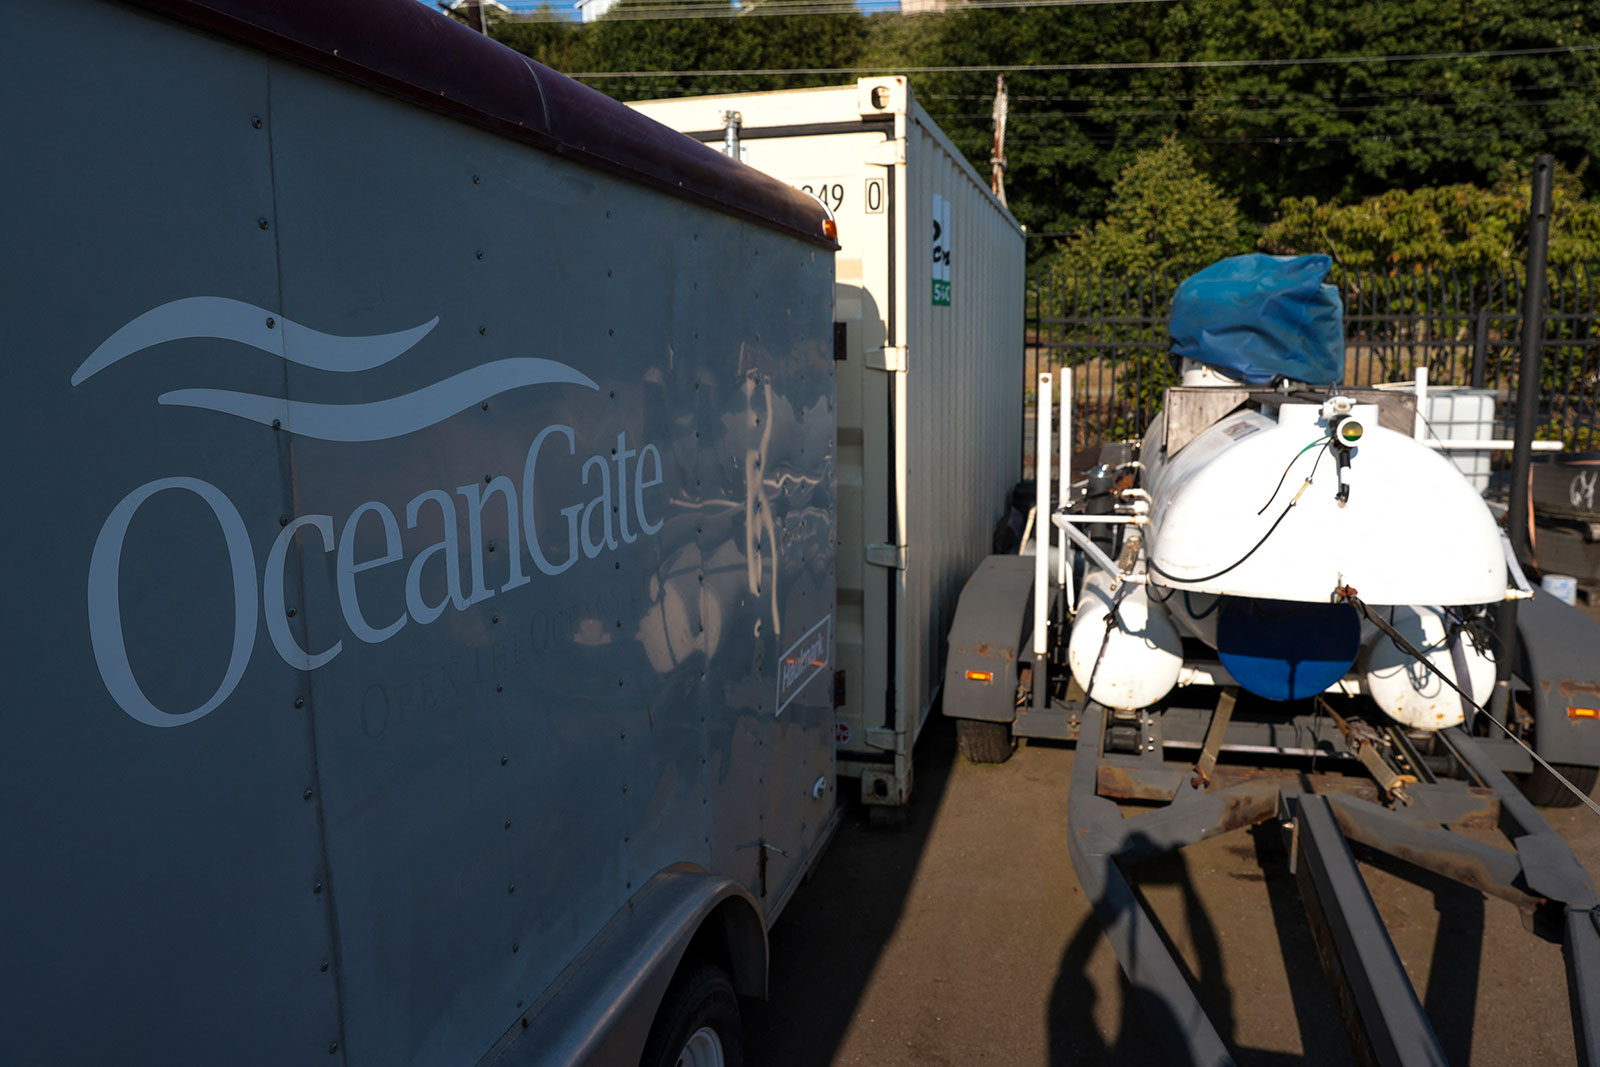 A trailer and other equipment are seen at OceanGate's headquarters in Everett, Washington, on June 22.